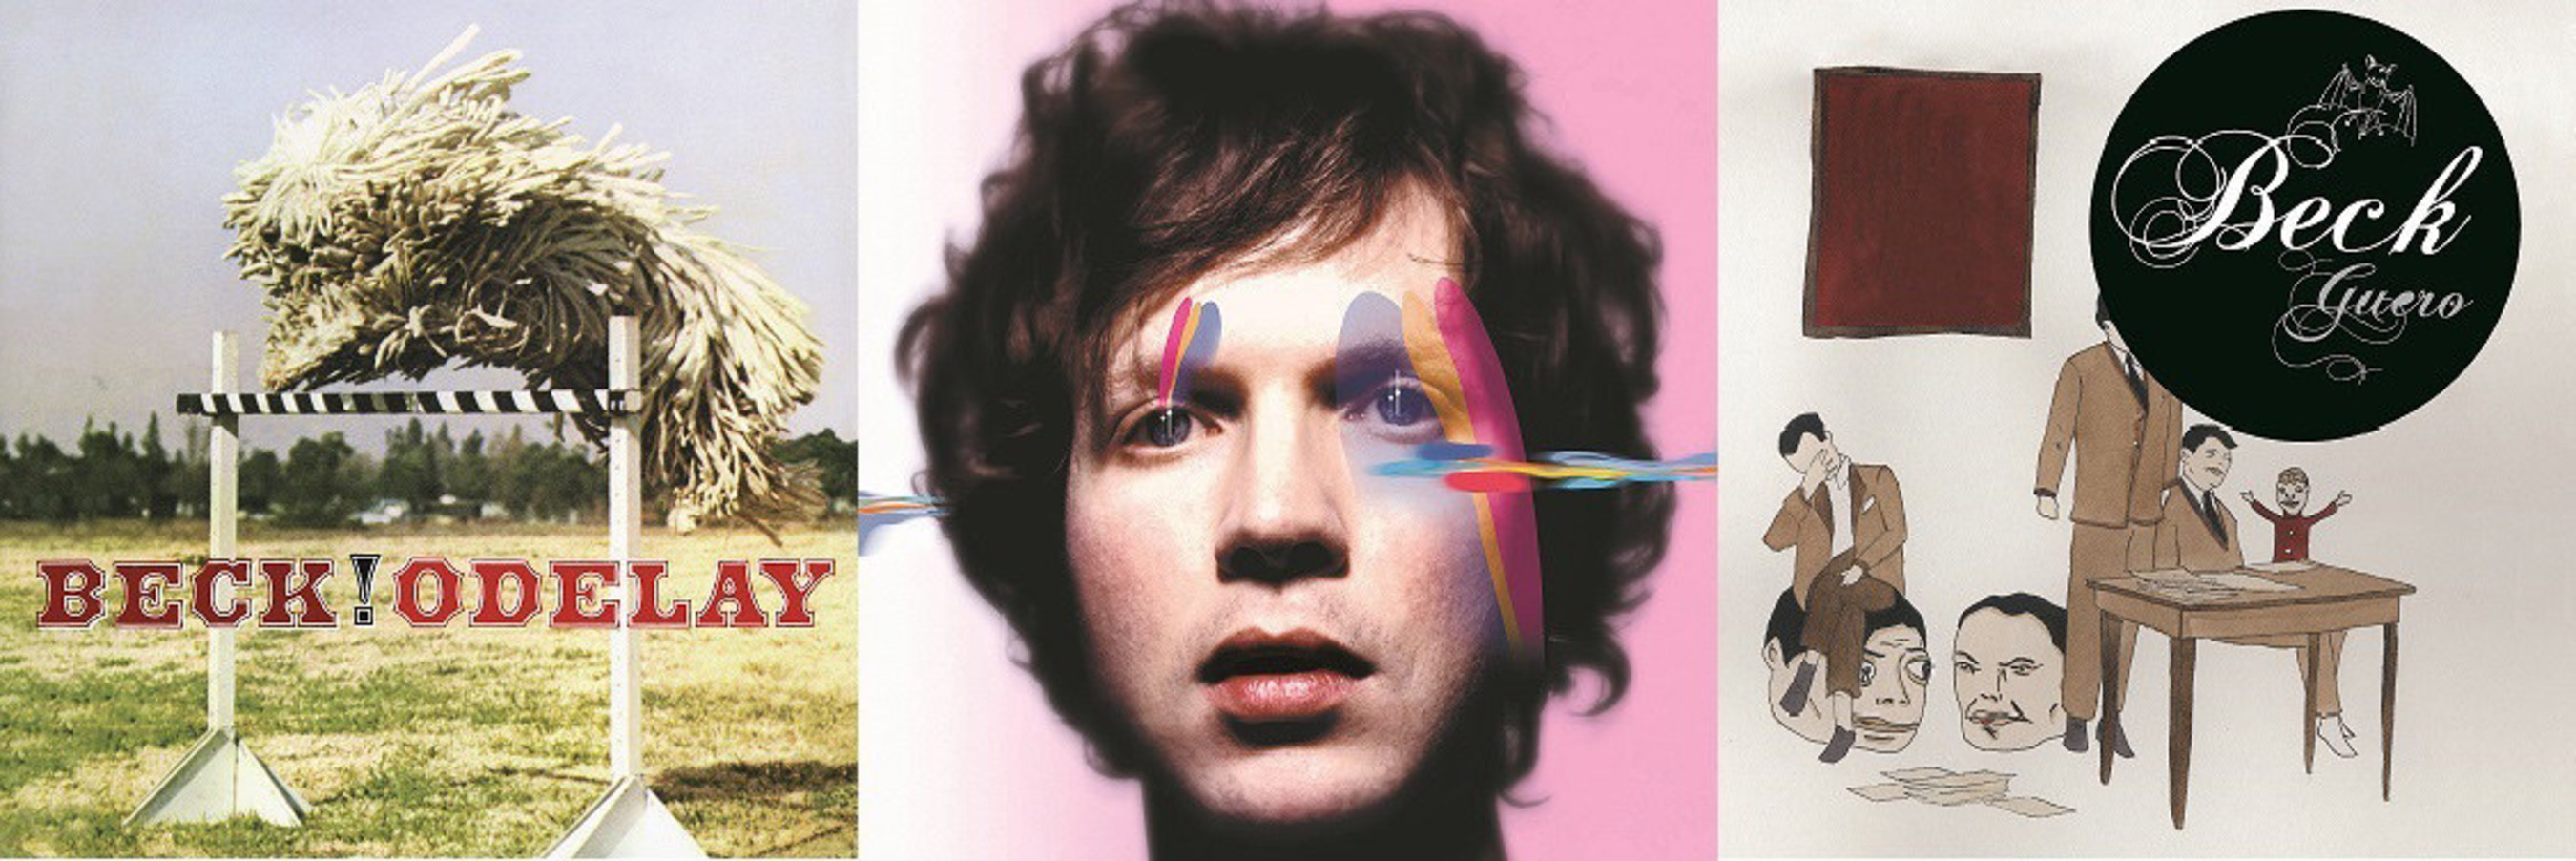 This fall, UMe will begin to reissue Beck's entire envelope-pushing DGC/Geffen/Interscope catalog on vinyl, beginning on October 28 with the trifecta of his 1996 GRAMMY(R) Award-winning single LP game-changer, 'Odelay,' 2002's beautiful, brokenhearted, 'Sea Change,' and 2005's tour de force, 'Guero.'